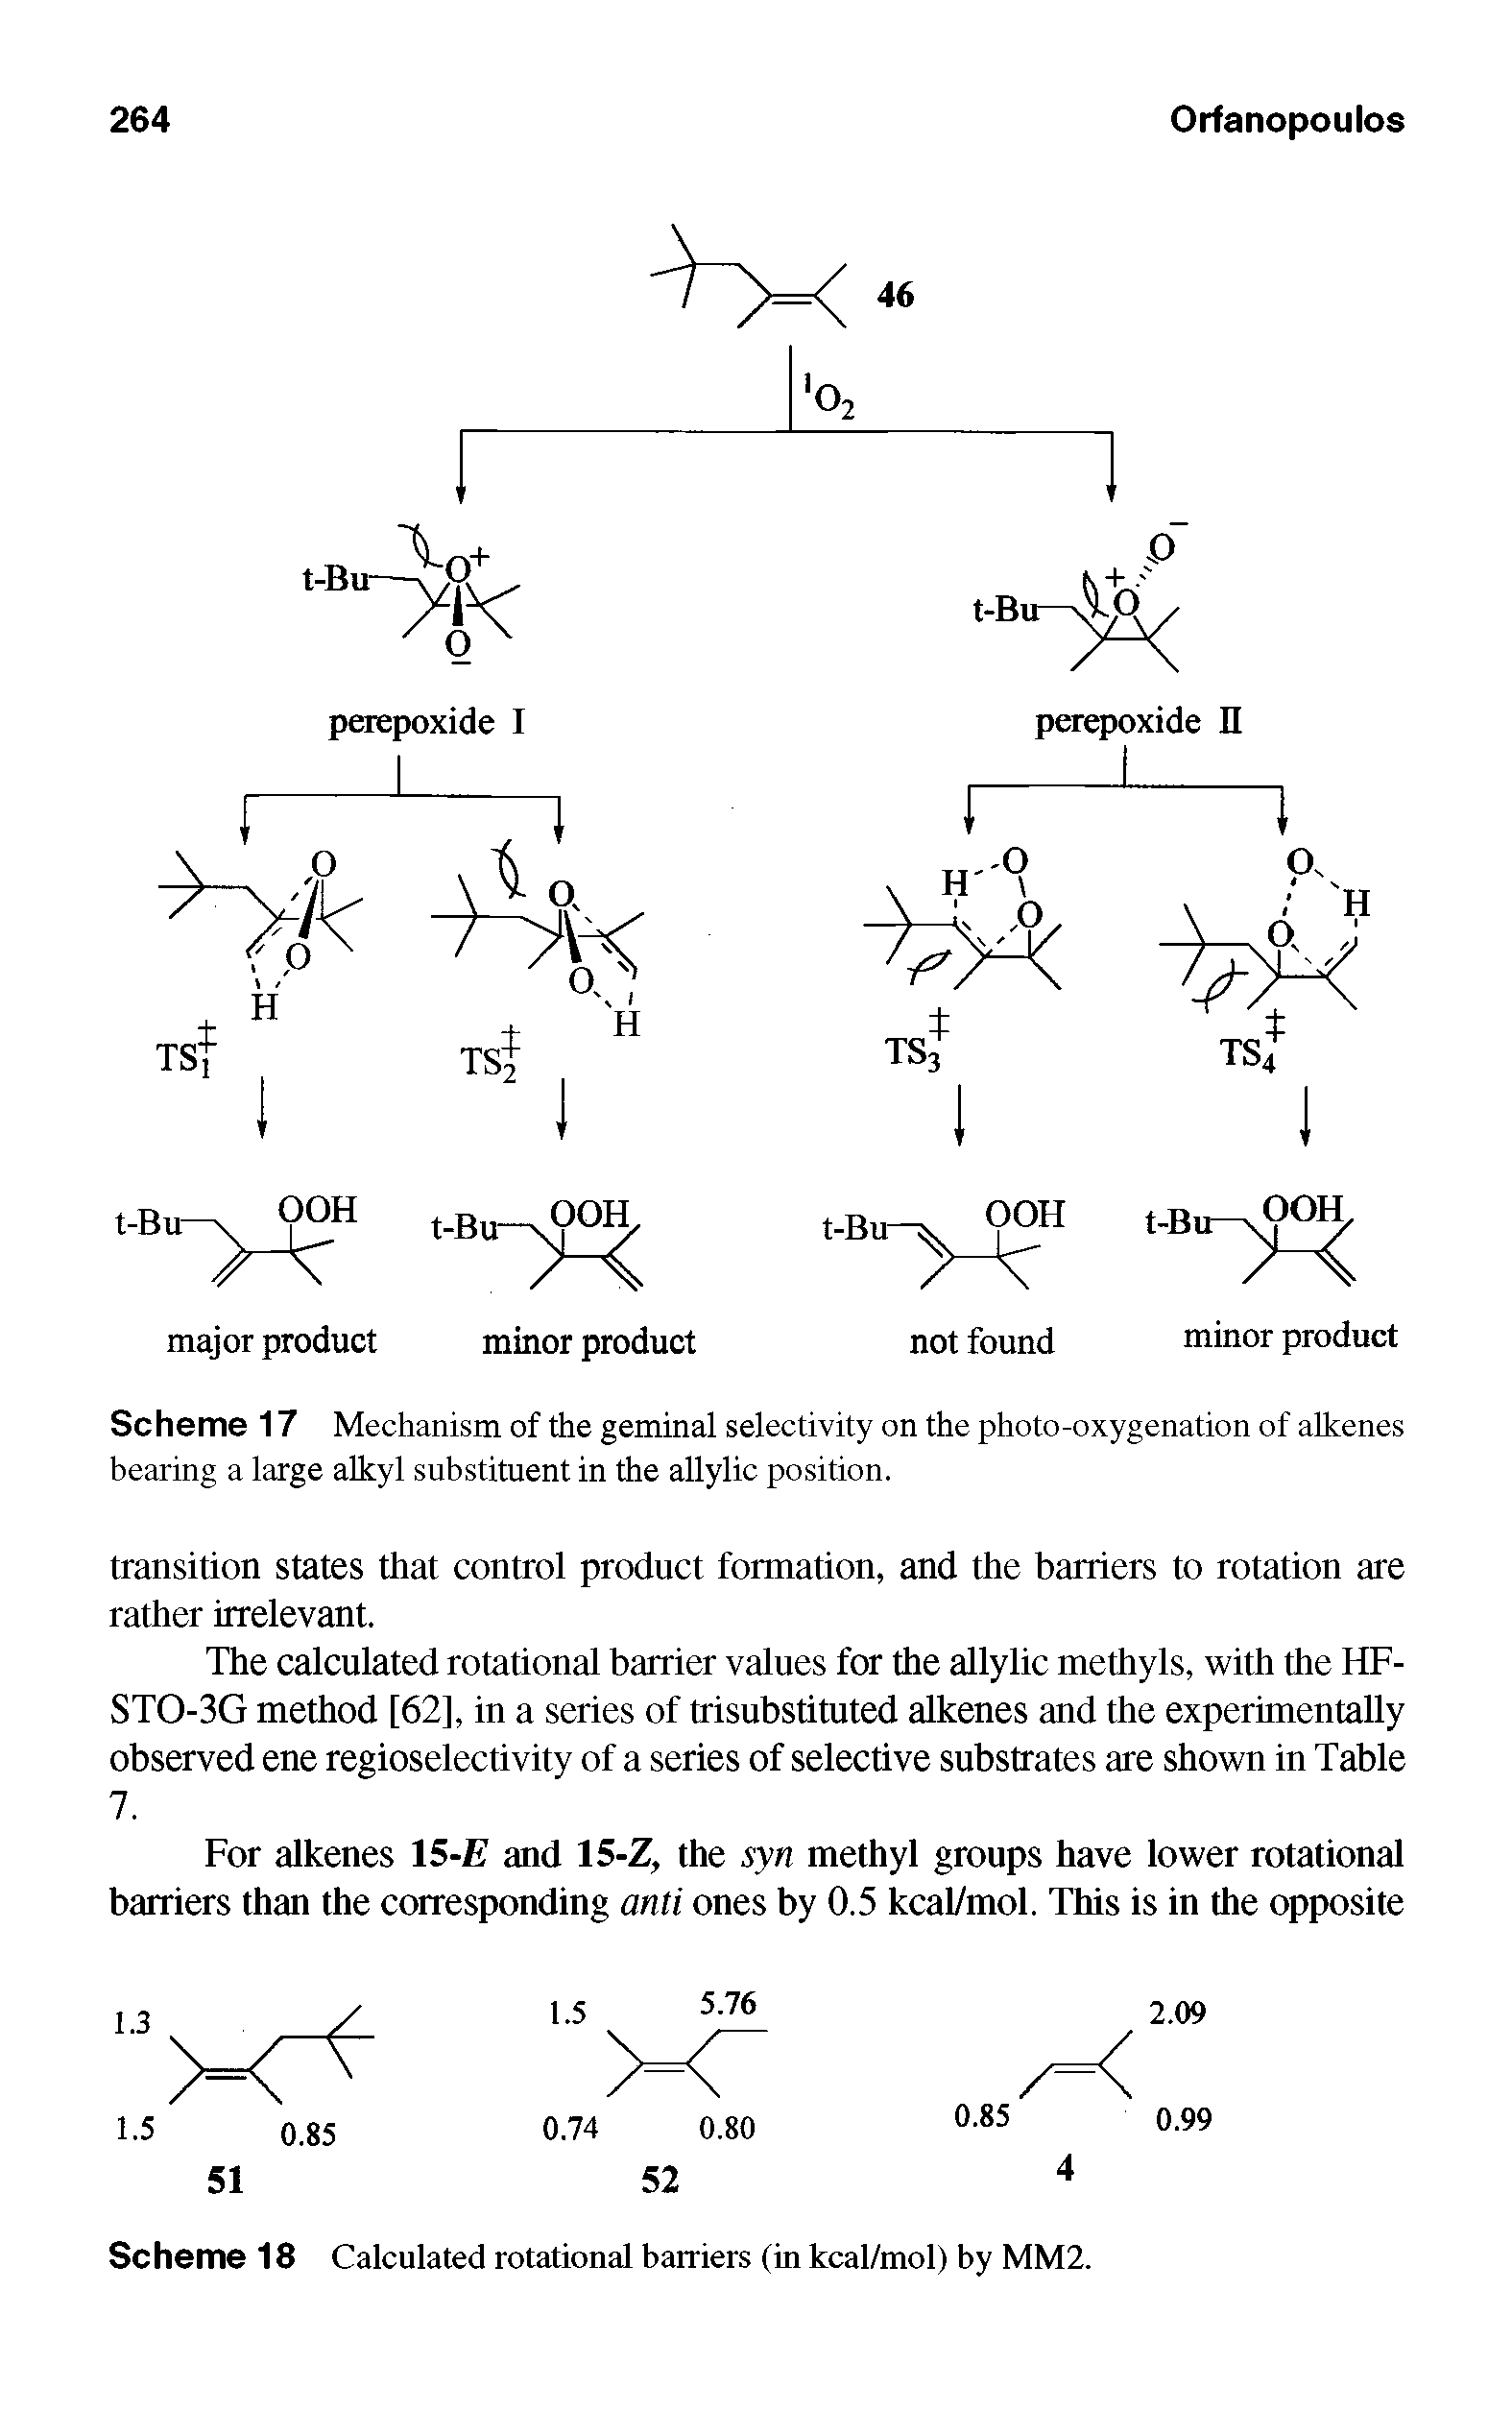 Scheme 17 Mechanism of the geminal selectivity on the photo-oxygenation of alkenes bearing a large alkyl substituent in the allylic position.